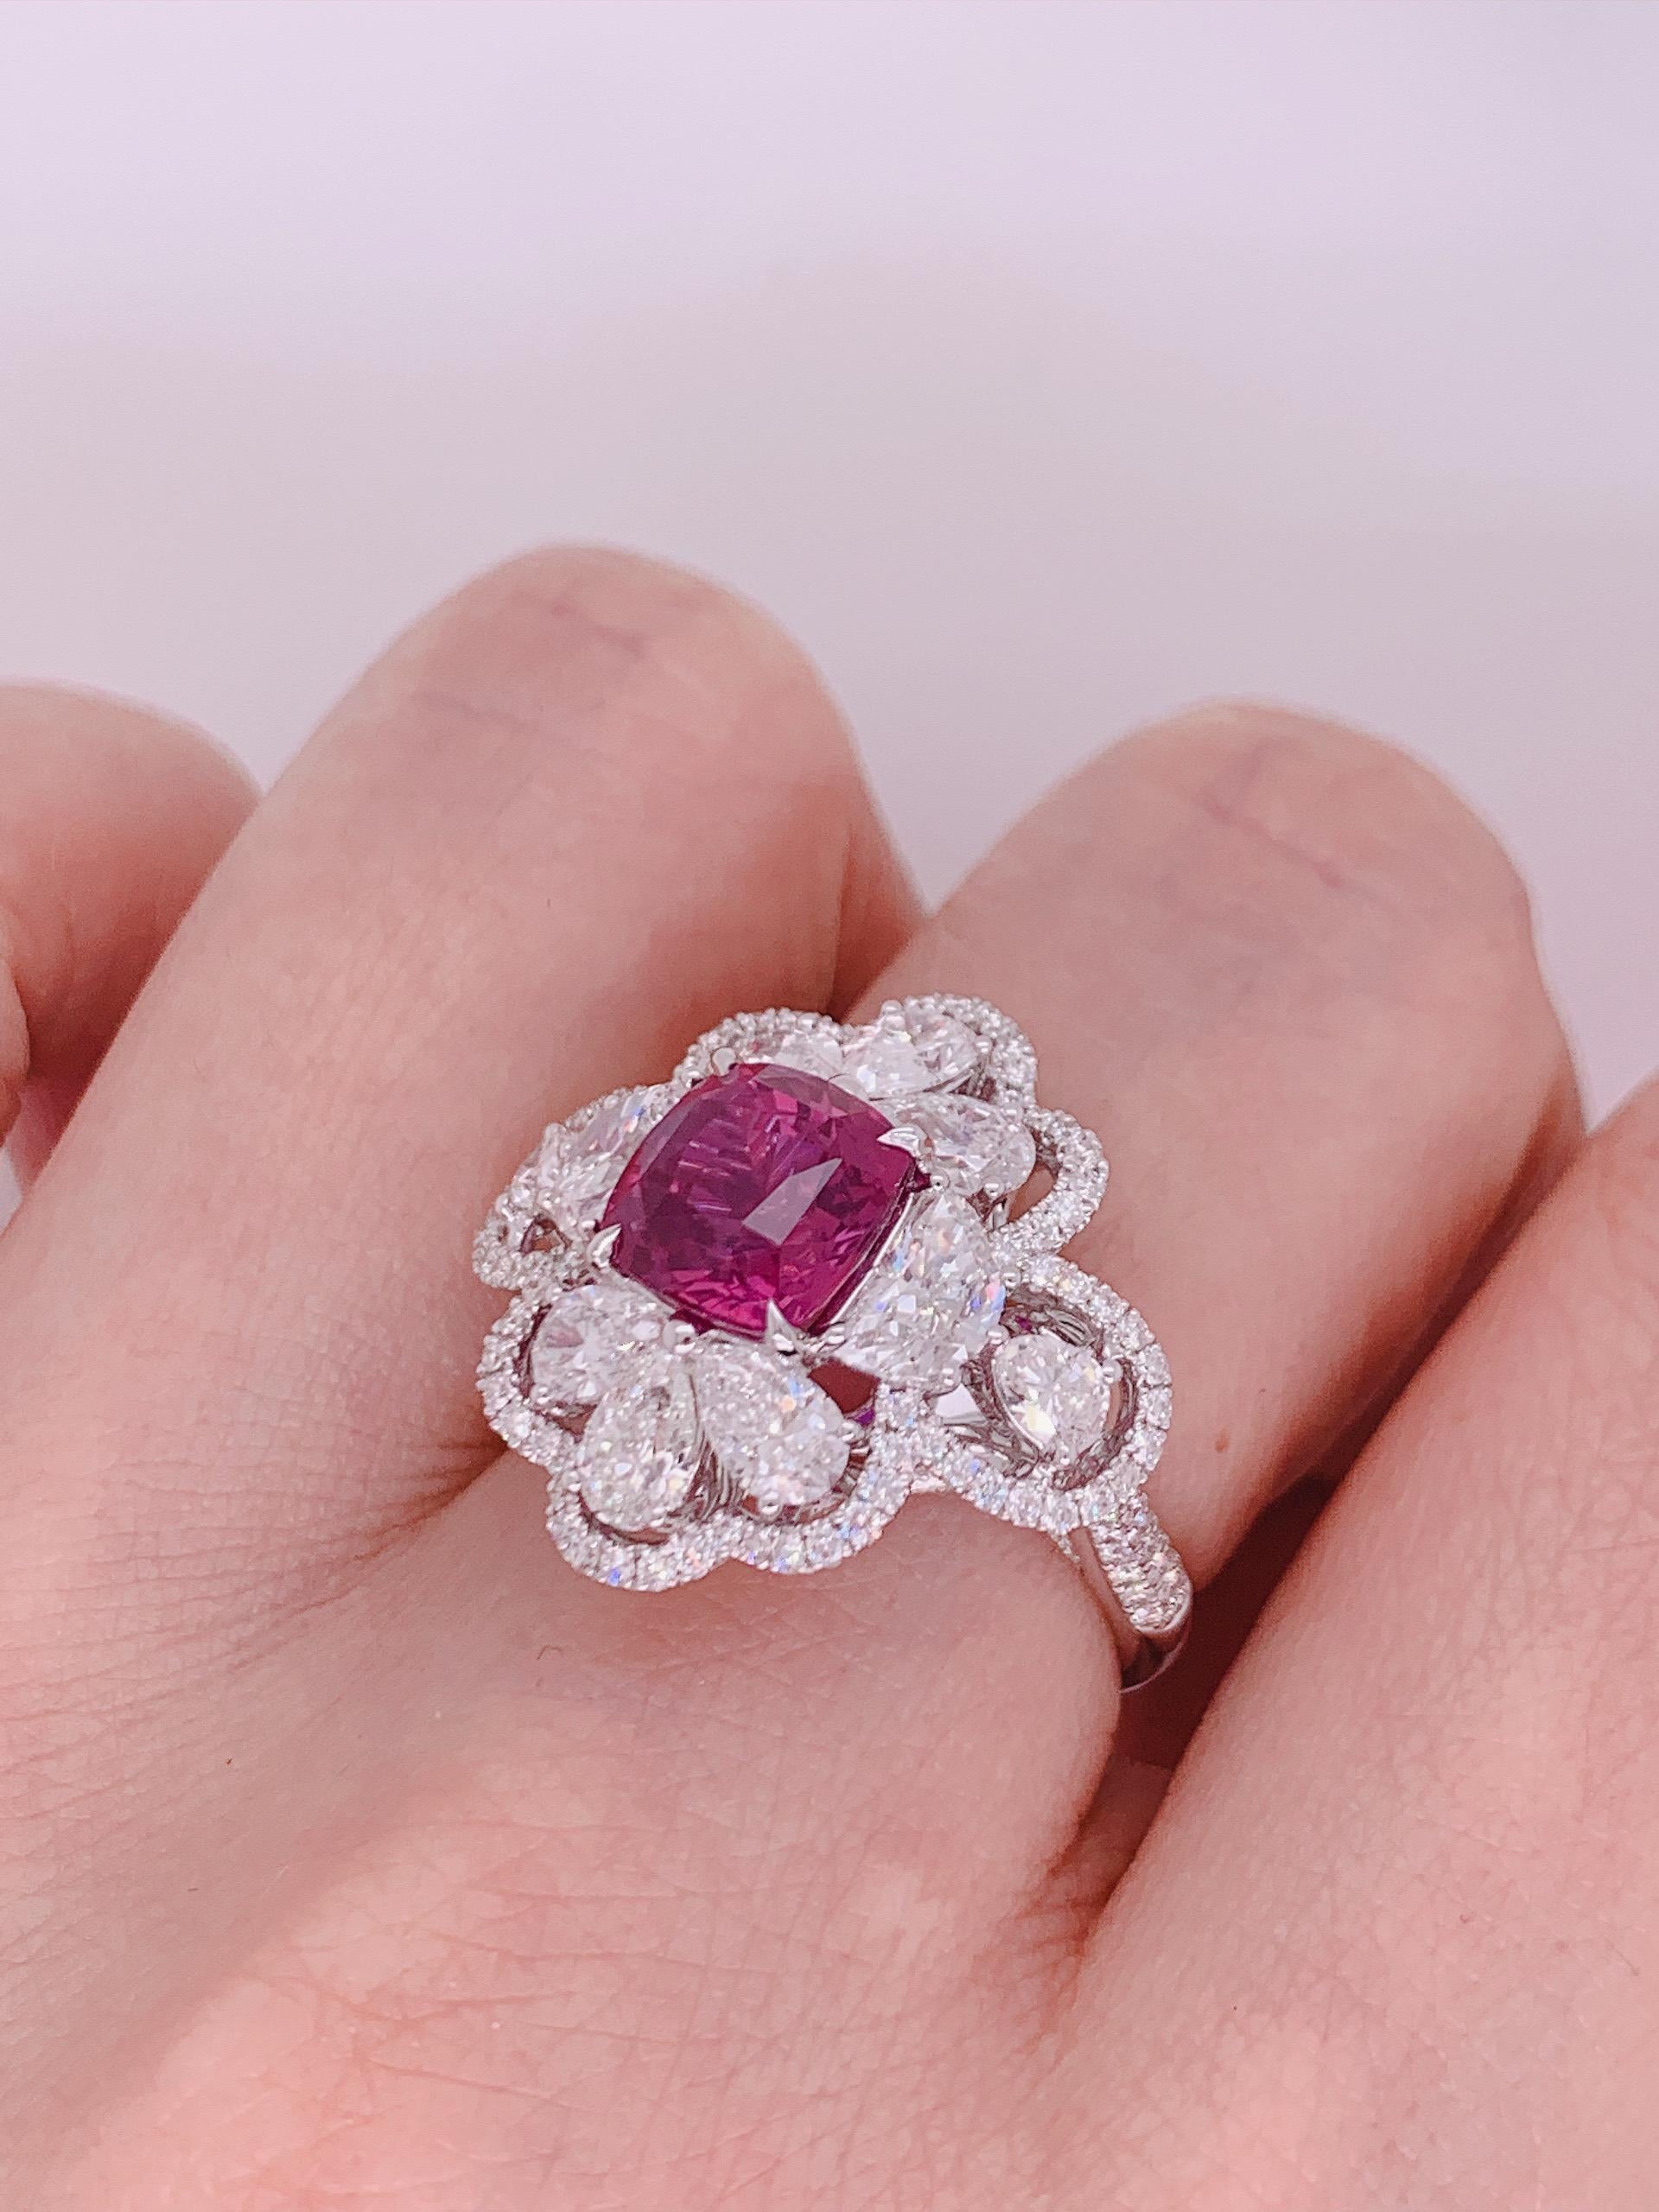 KAHN GRS Certified 3.11 Carat Unheated Pink Sapphire Ring For Sale 2